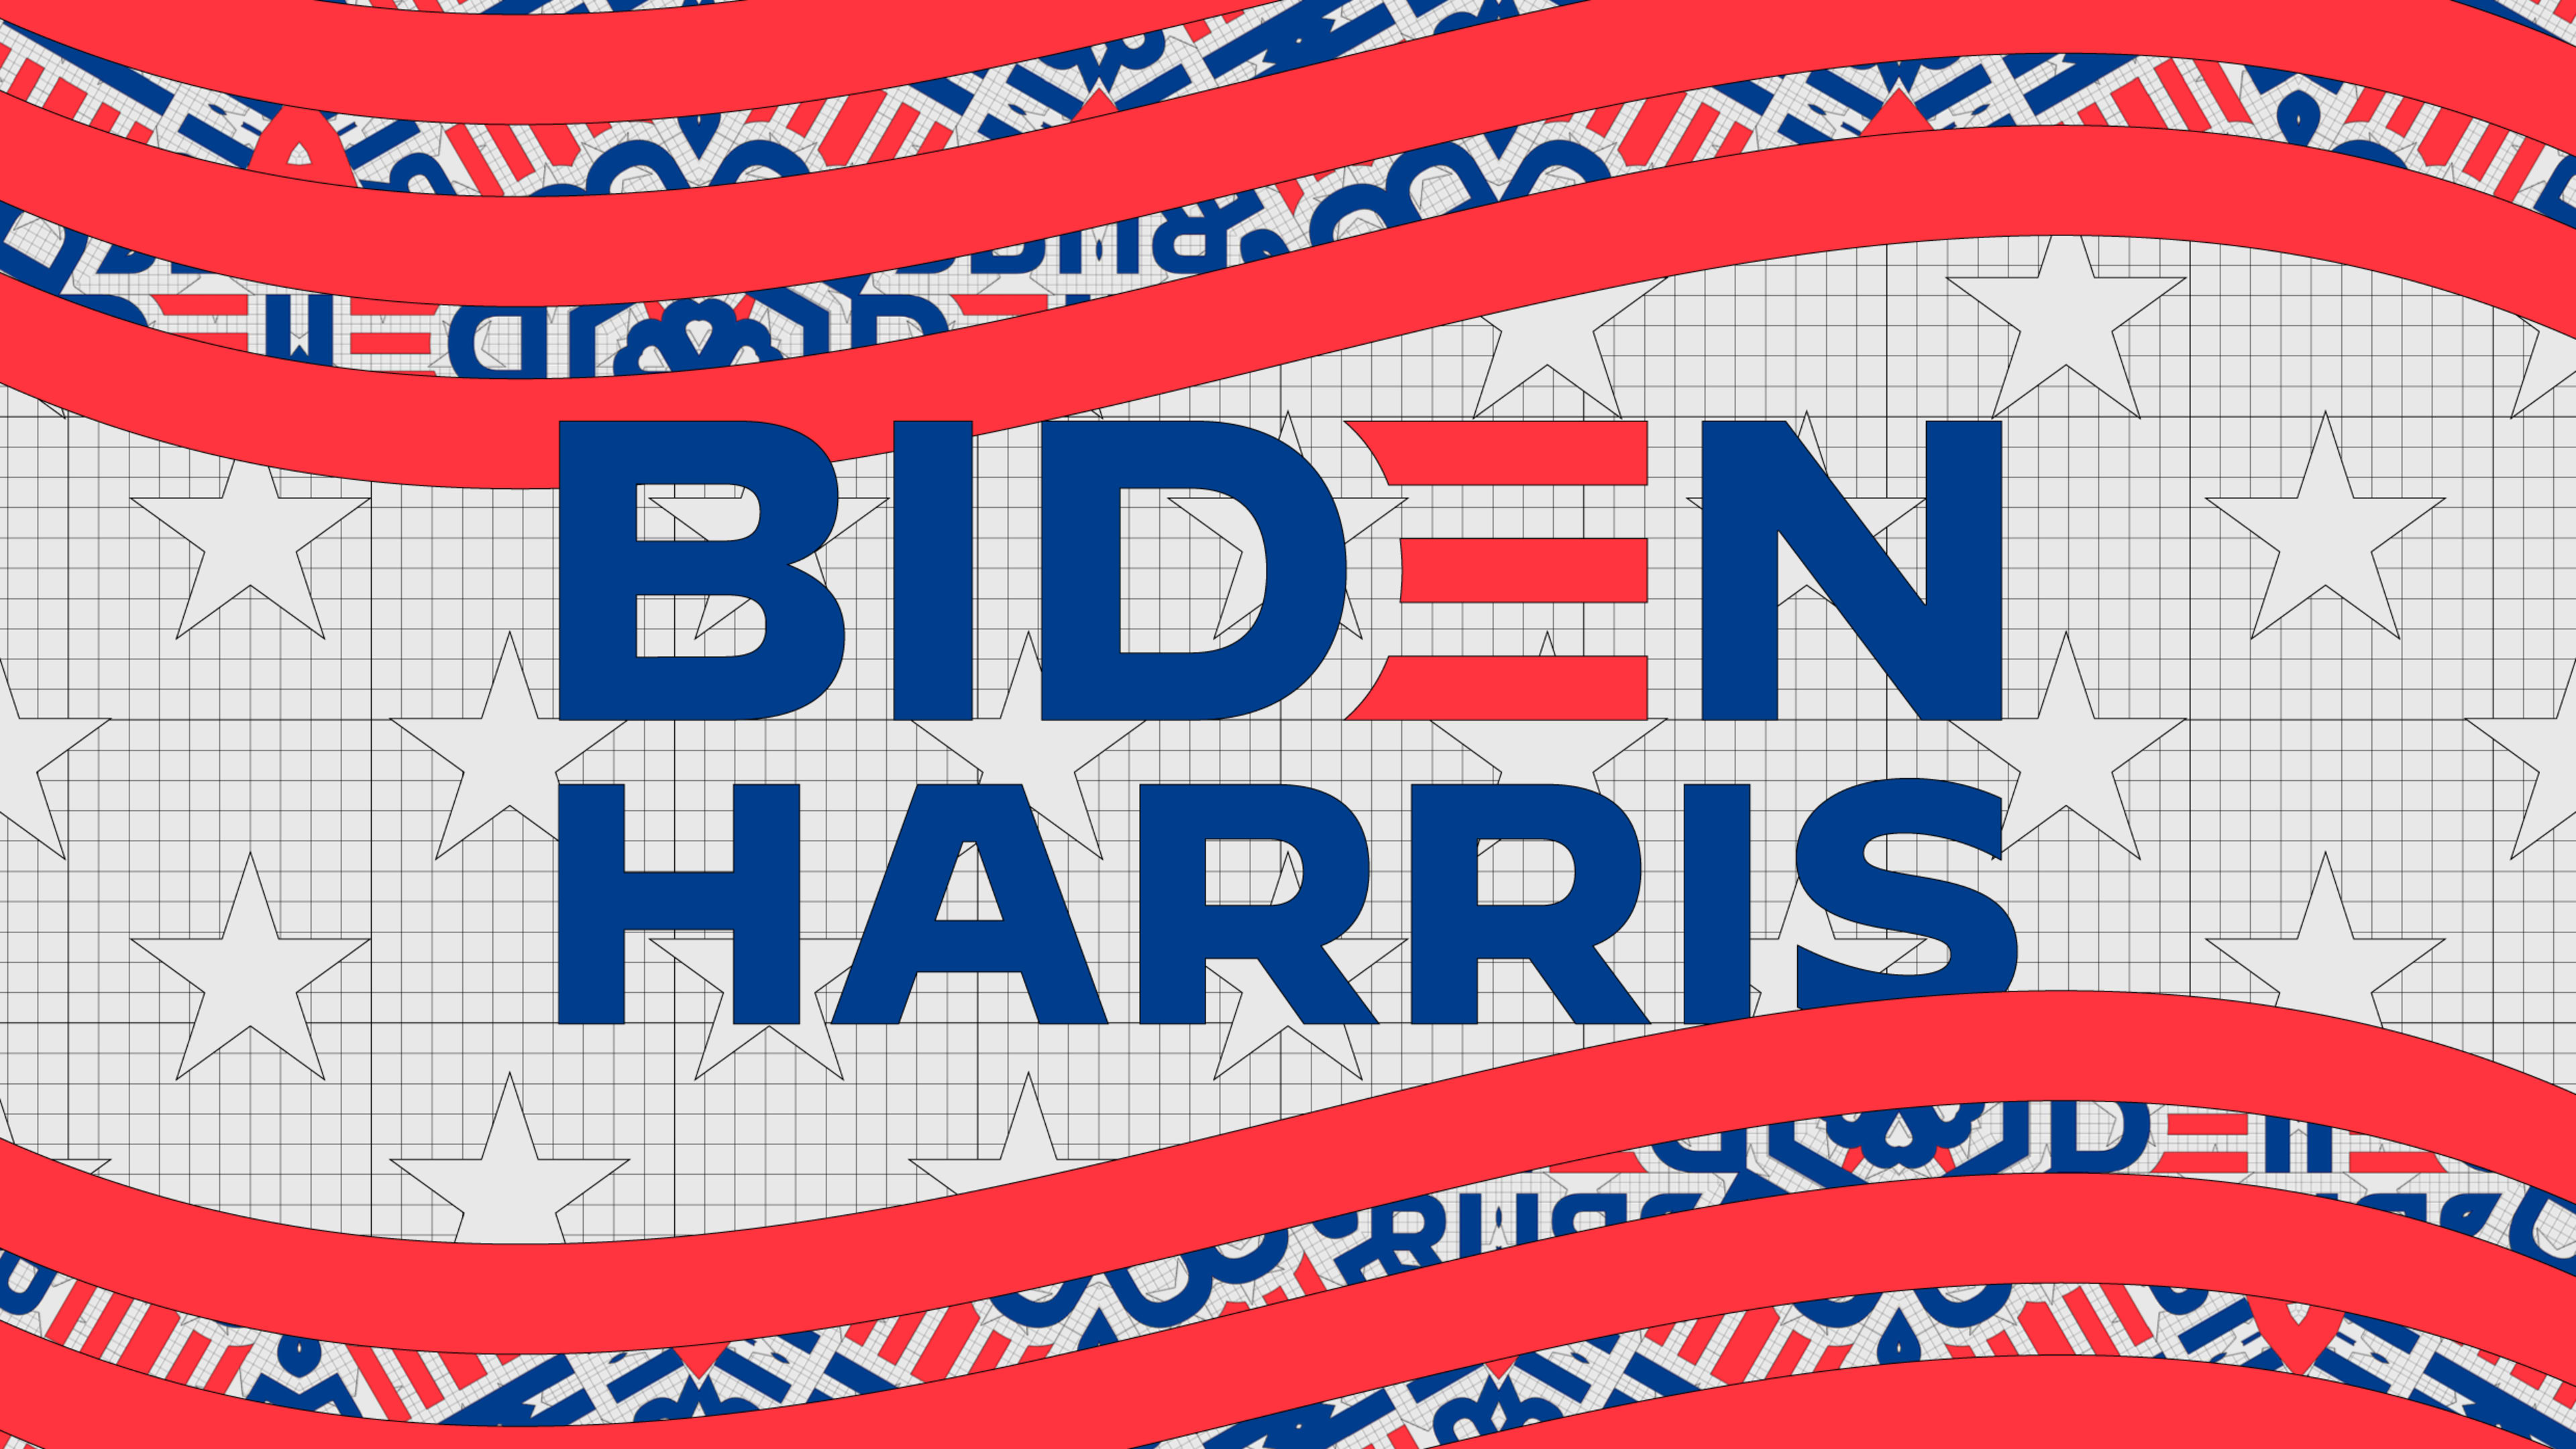 Experts weigh in on the Biden-Harris logo: ‘It could be scribbled on a napkin and I’d be happy’